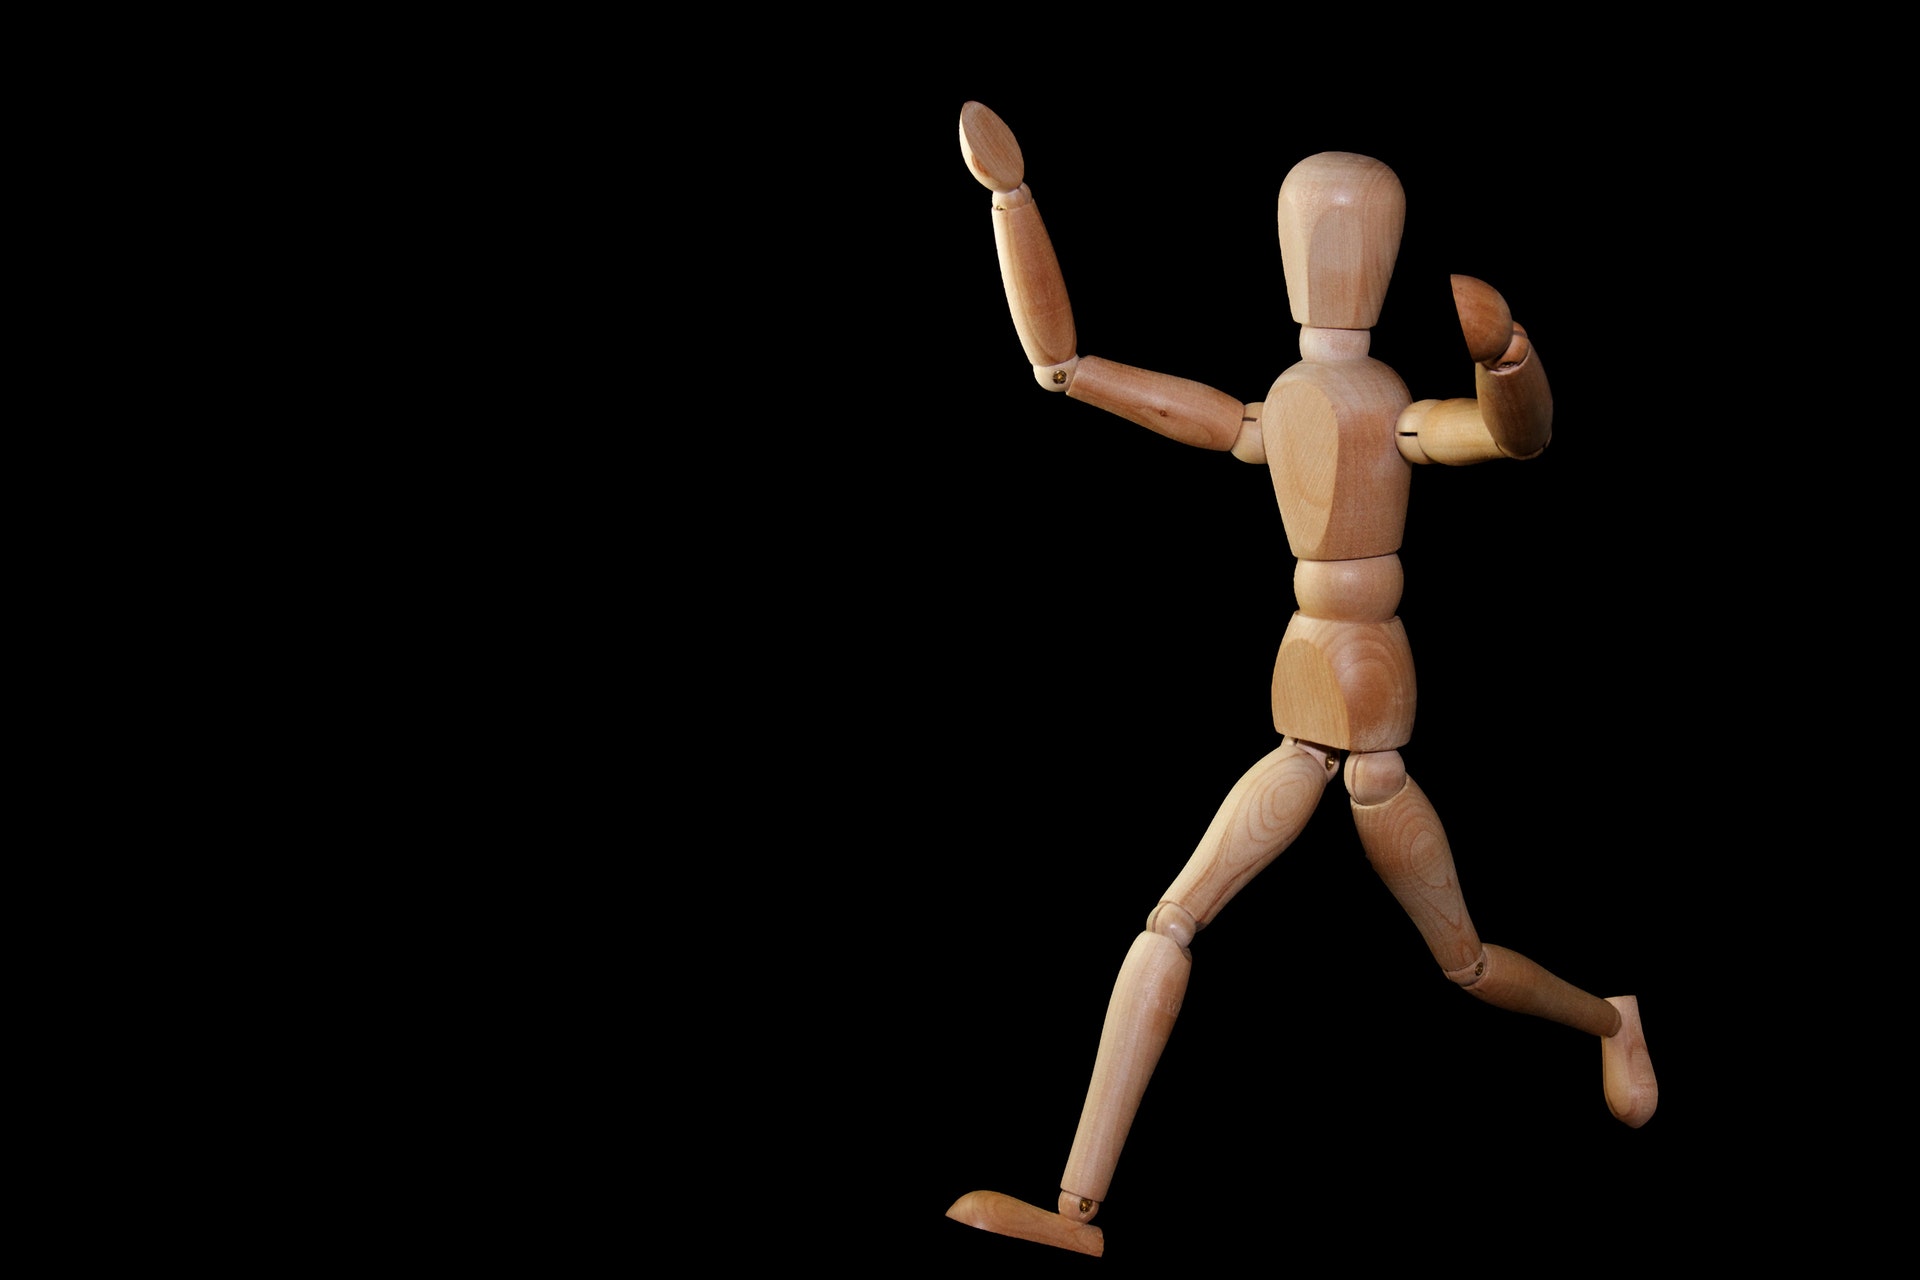 timelapse-photography-of-brown-wooden-puppet-running-on-a-220443.jpg